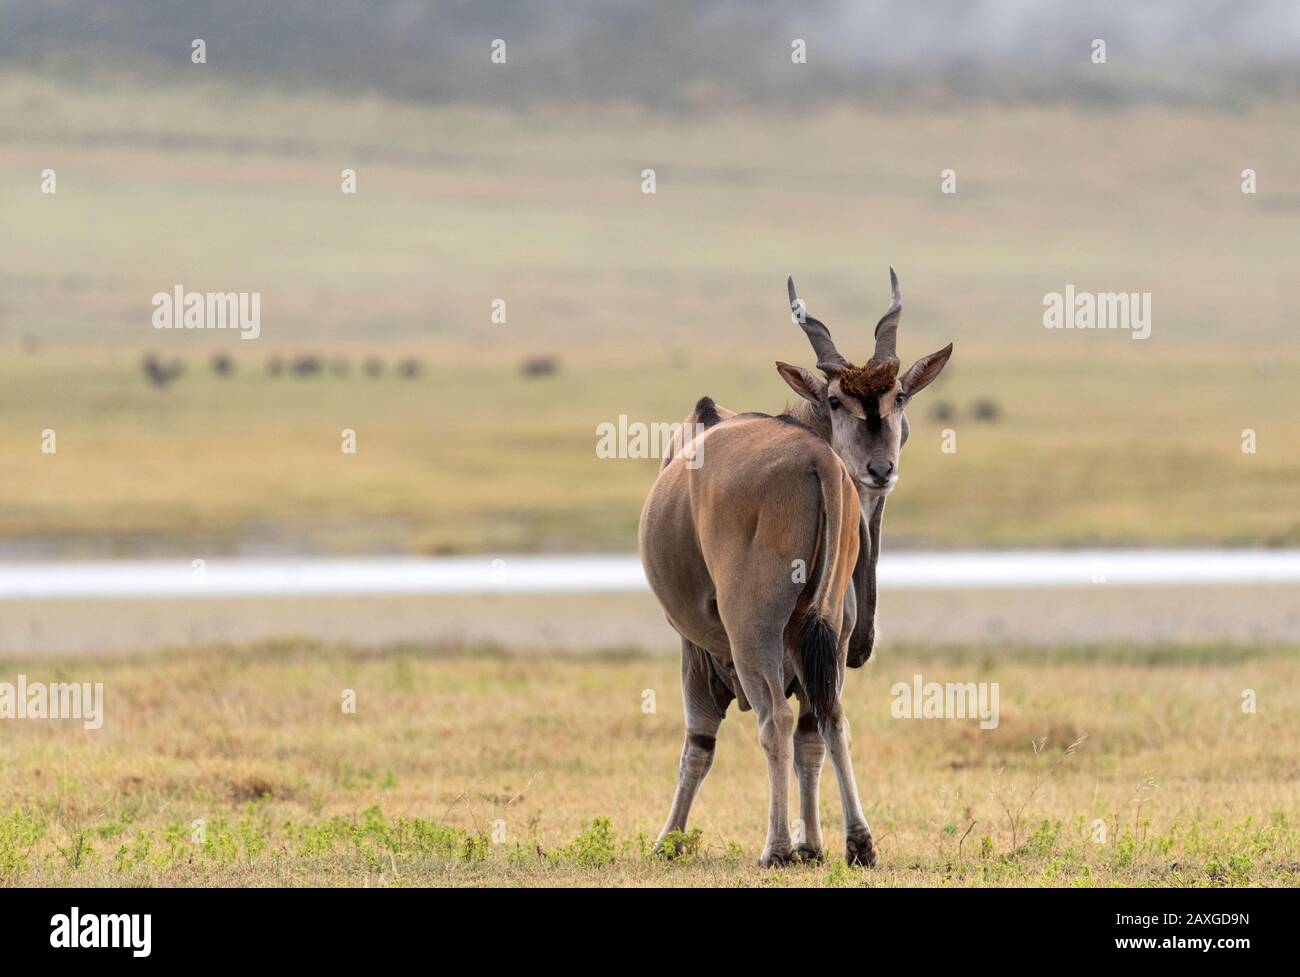 The largest of the African antelope, the Eland, looking back at who is taking his photo. Stock Photo